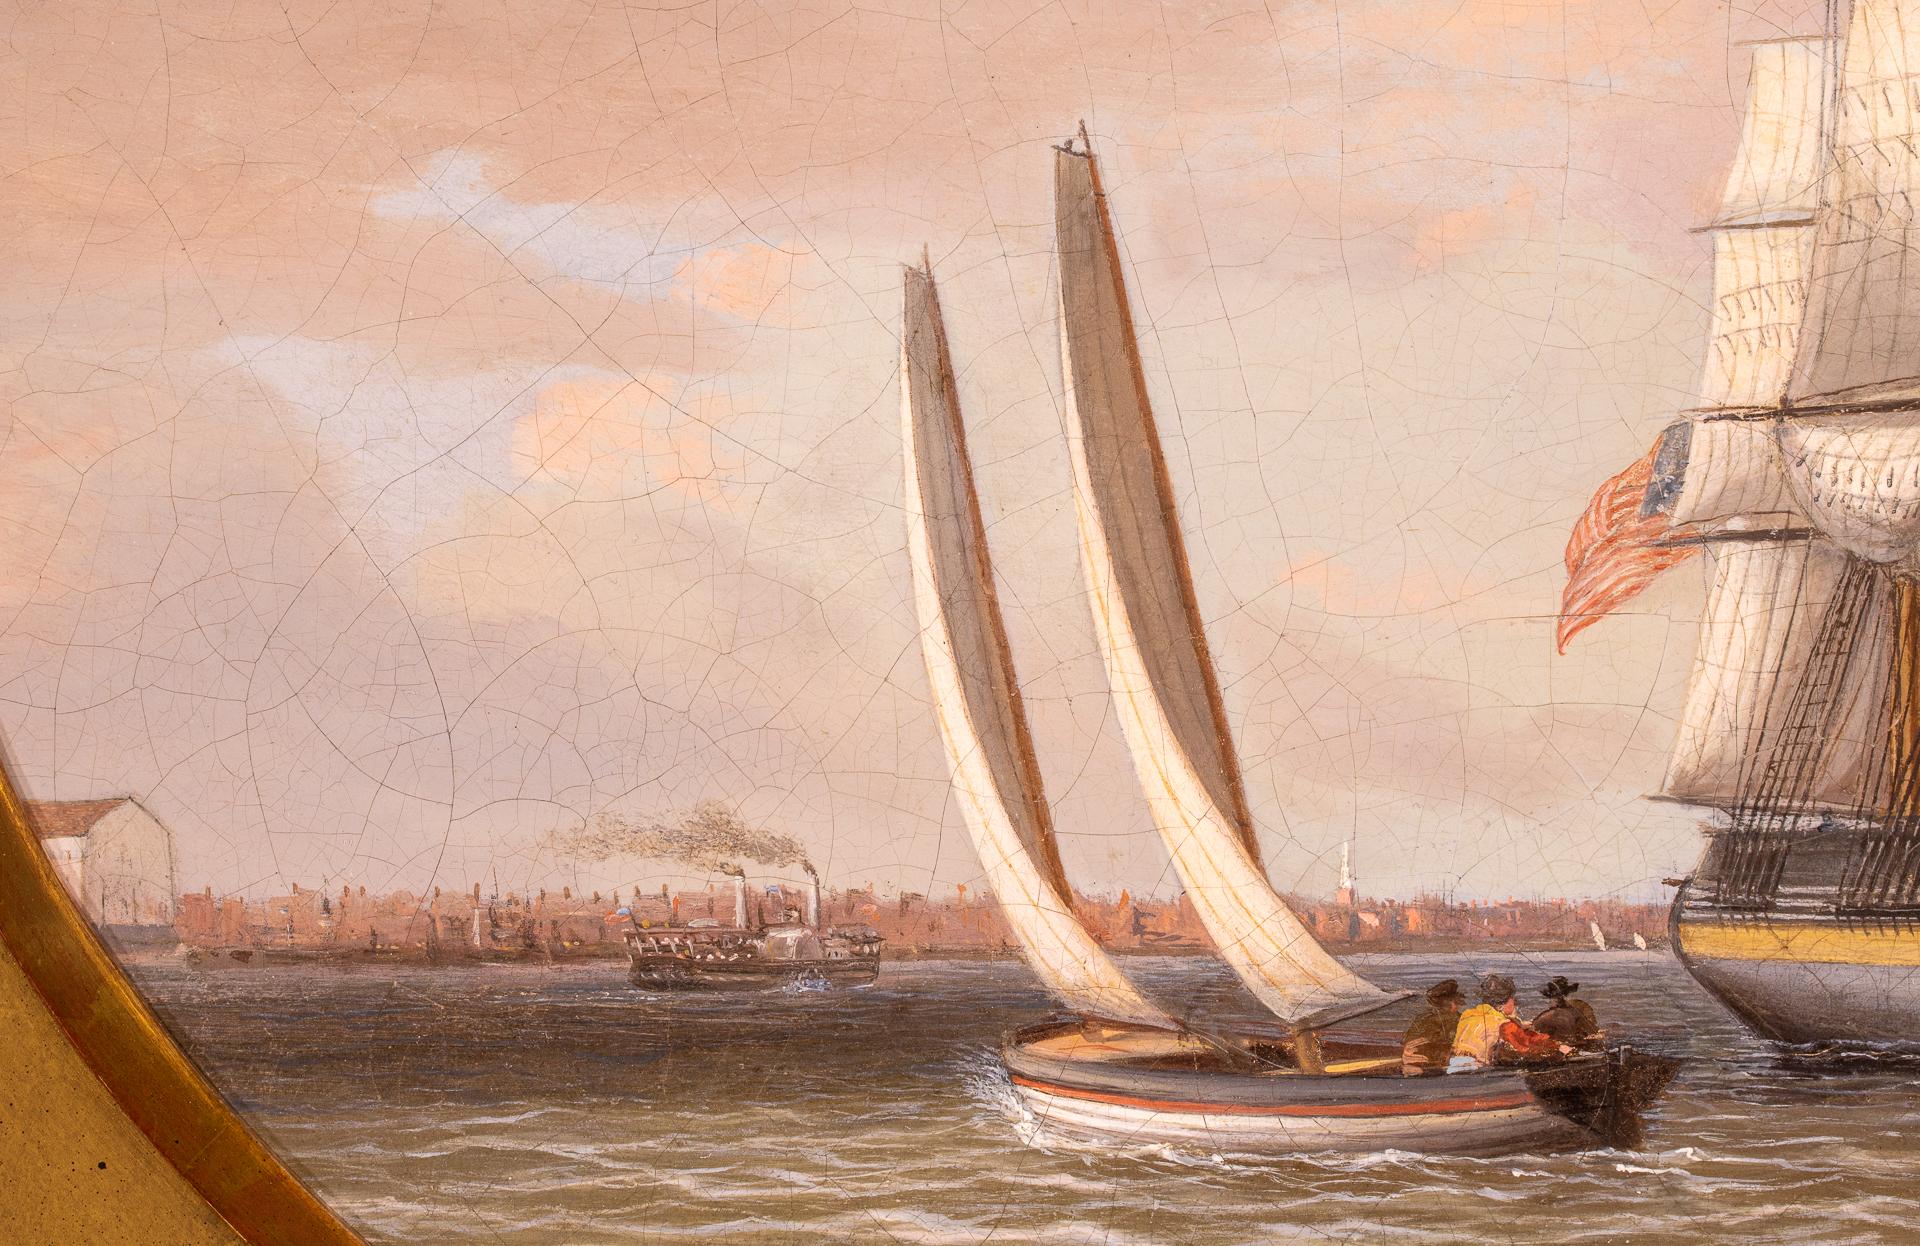 Thomas Birch is considered one of the earliest American Marine painters of importance both in his own time and historically, forming the foundation of what would become a great American Maritime movement in the successive years of the 19th